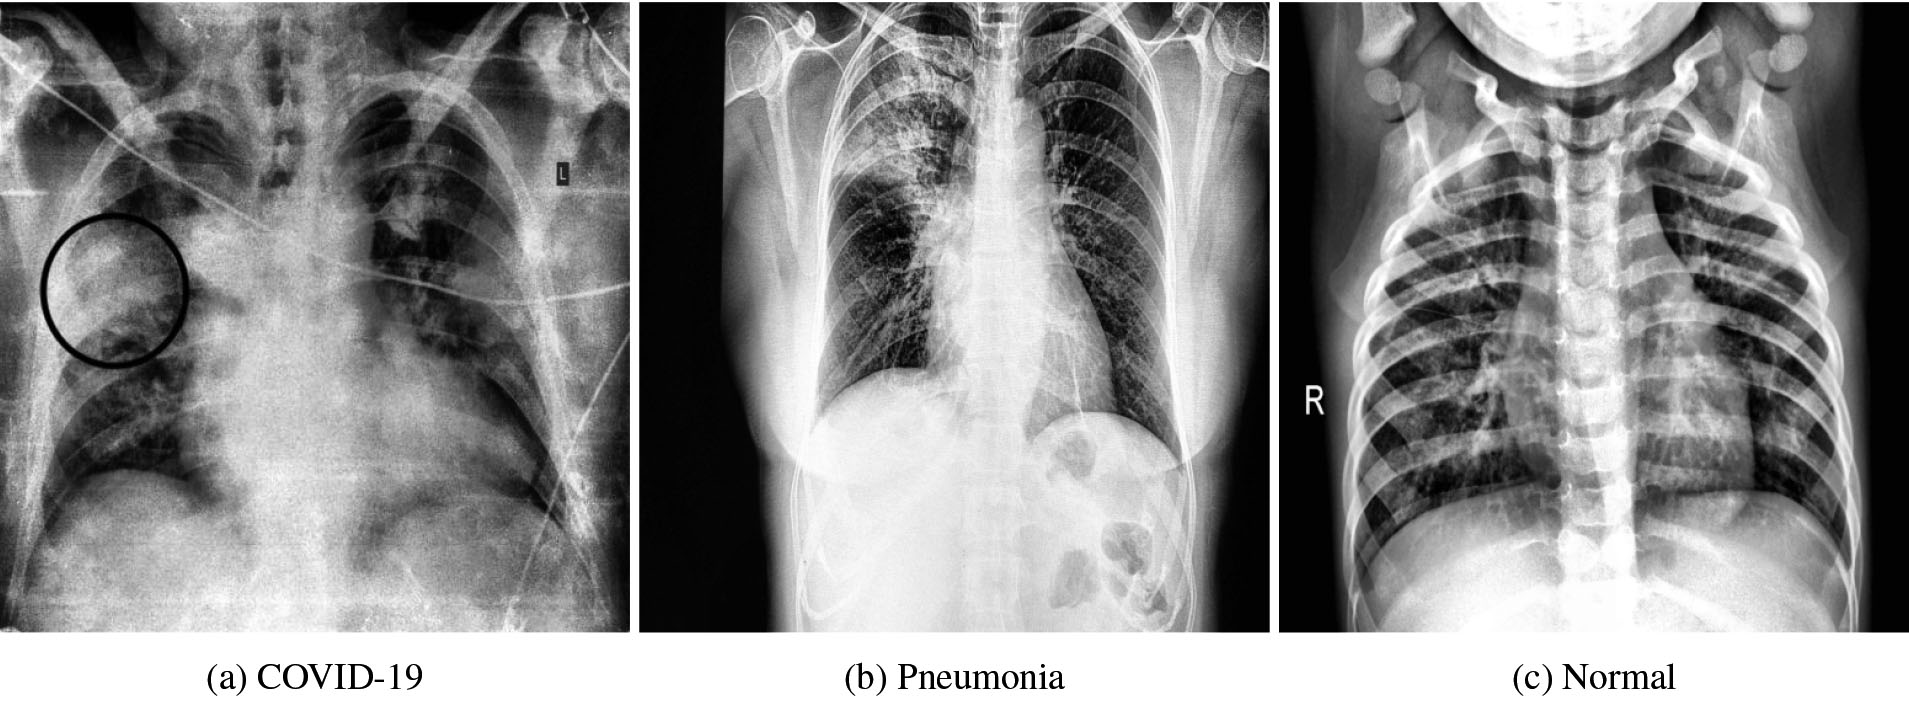 Manually annotated CXR images highlighting the regions of interest that distinguishes between COVID-19 and pneumonia cases. The above regions are marked by a radiologist after clinical evaluation of these CXR images.